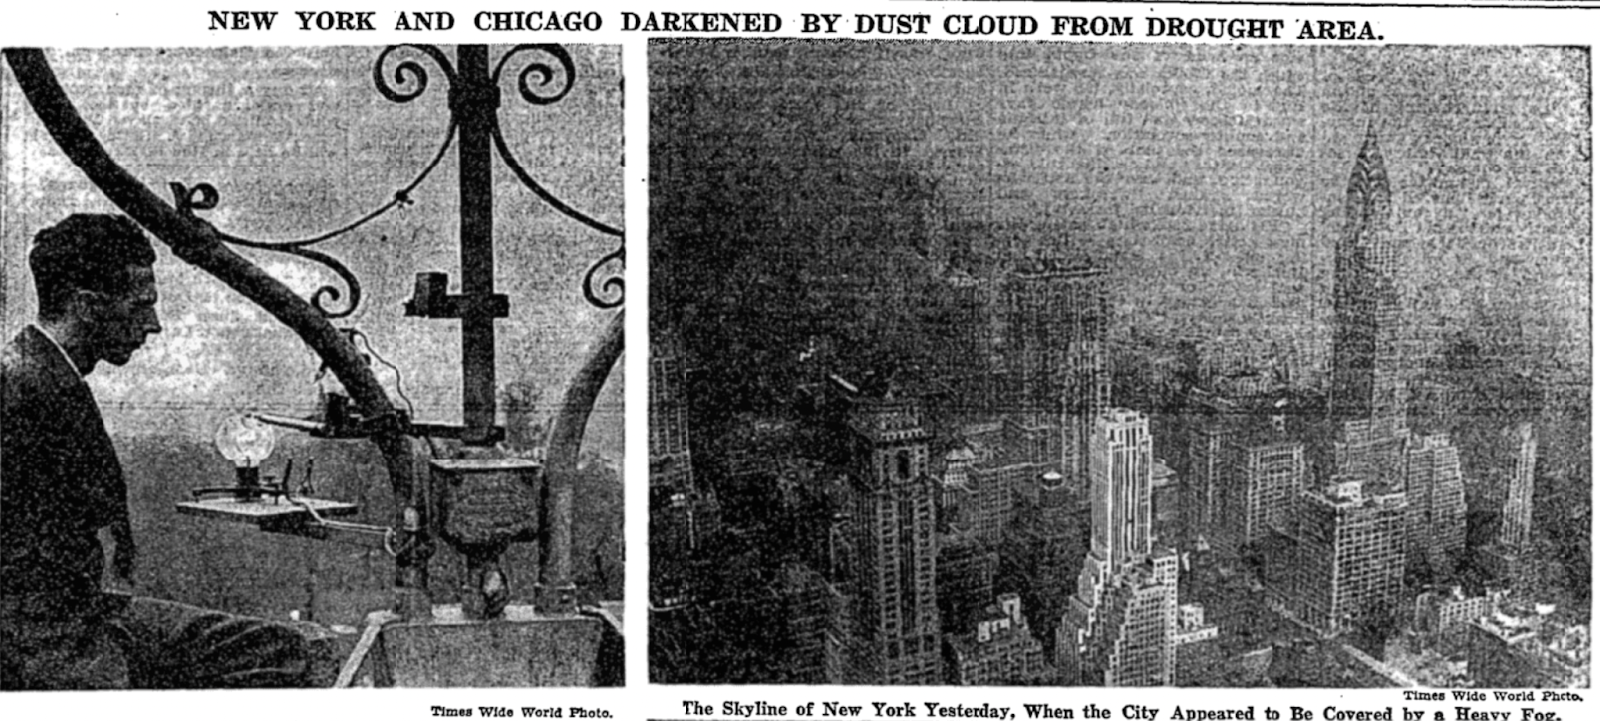 Archival newspaper clipping with headline "New York and Chicago Darkened By Dust Cloud From Drought Area" shows a meteorologist at work and the city skyline obscured by swirling dust.